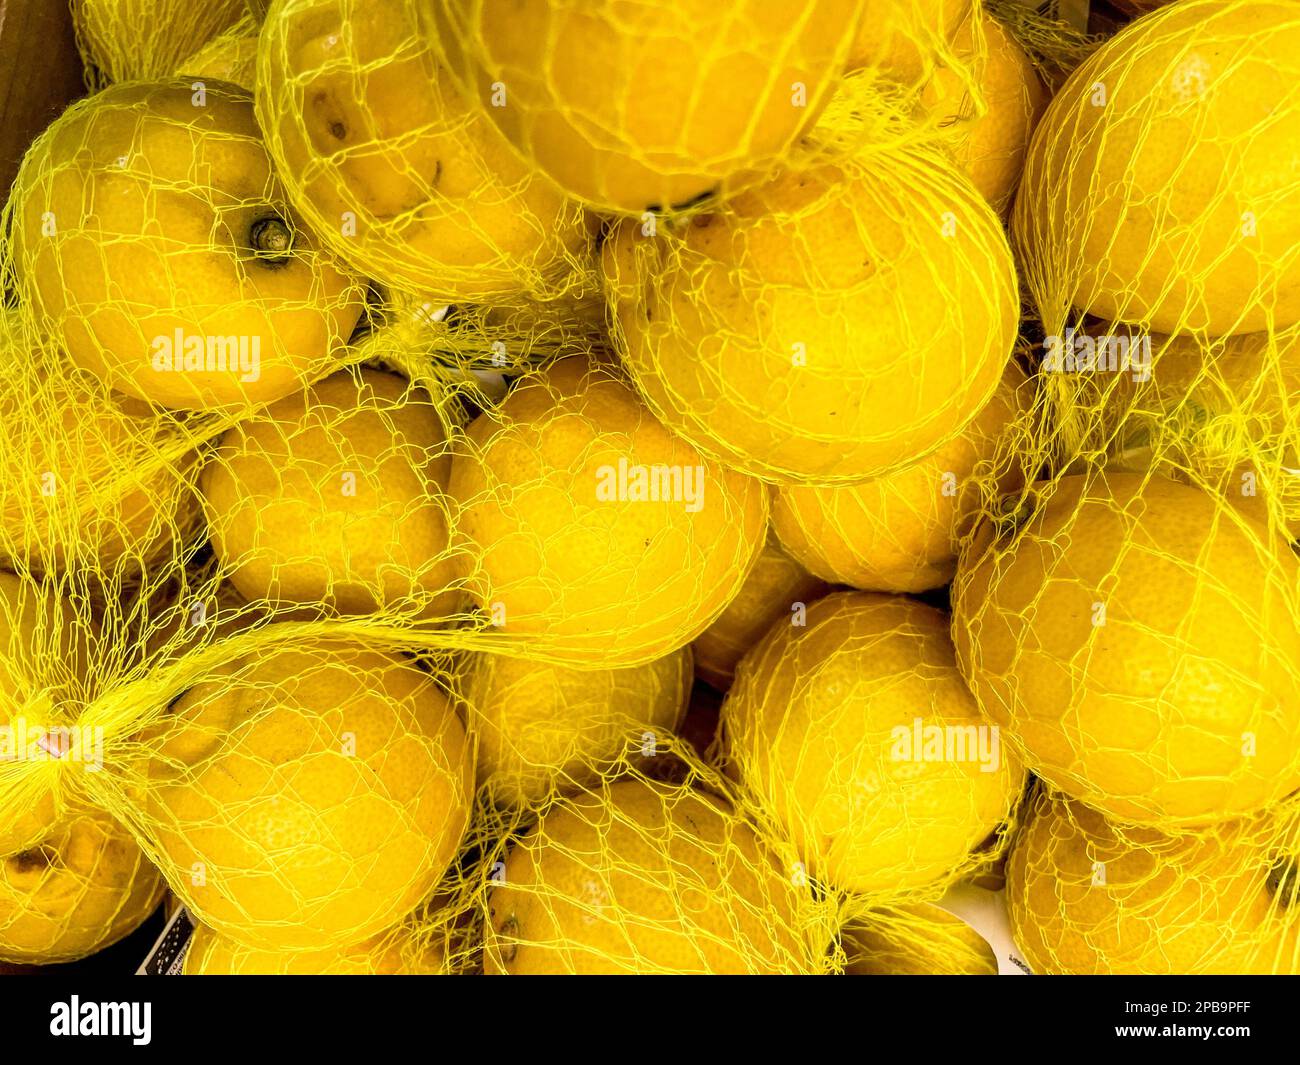 Lemon. The lemon (Citrus limon) is a species of small evergreen trees in the flowering plant family Rutaceae, native to Asia, primarily Northeast Indi Stock Photo